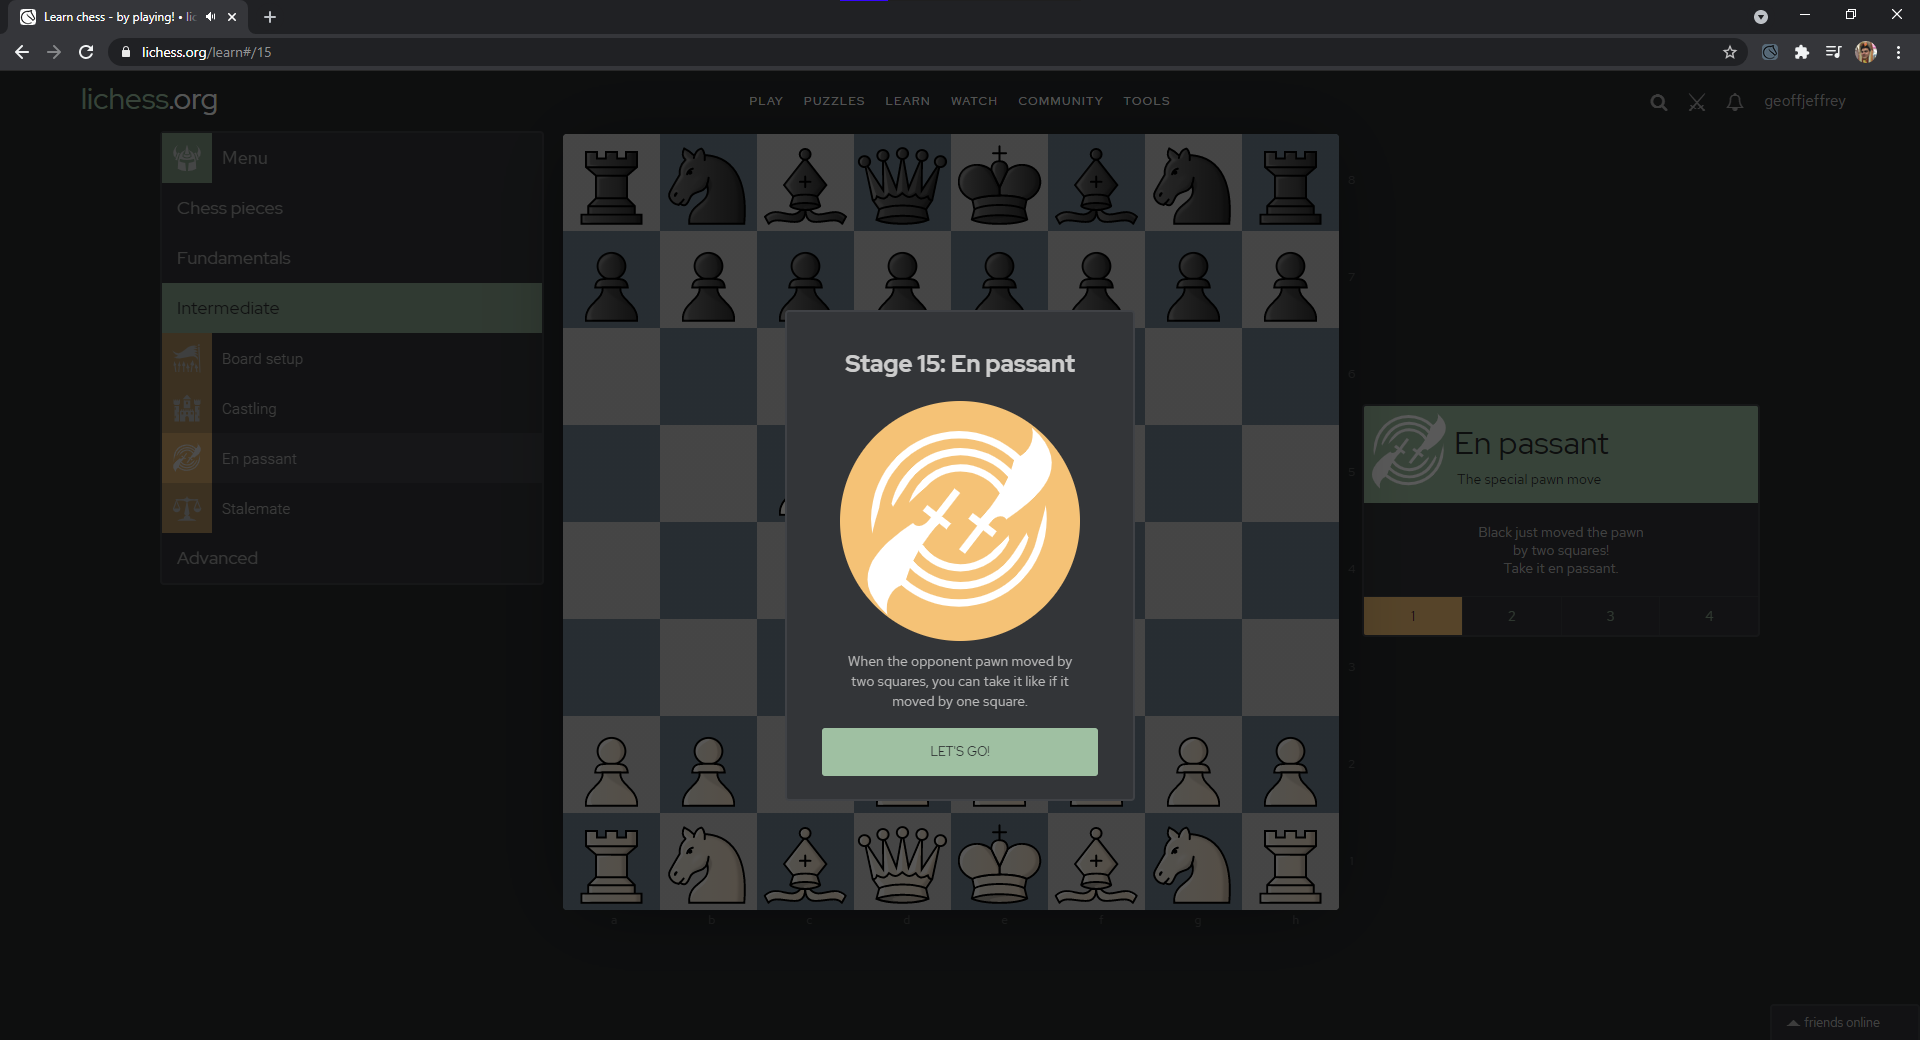 The LiChess Tools browser extension turbocharges lichess!